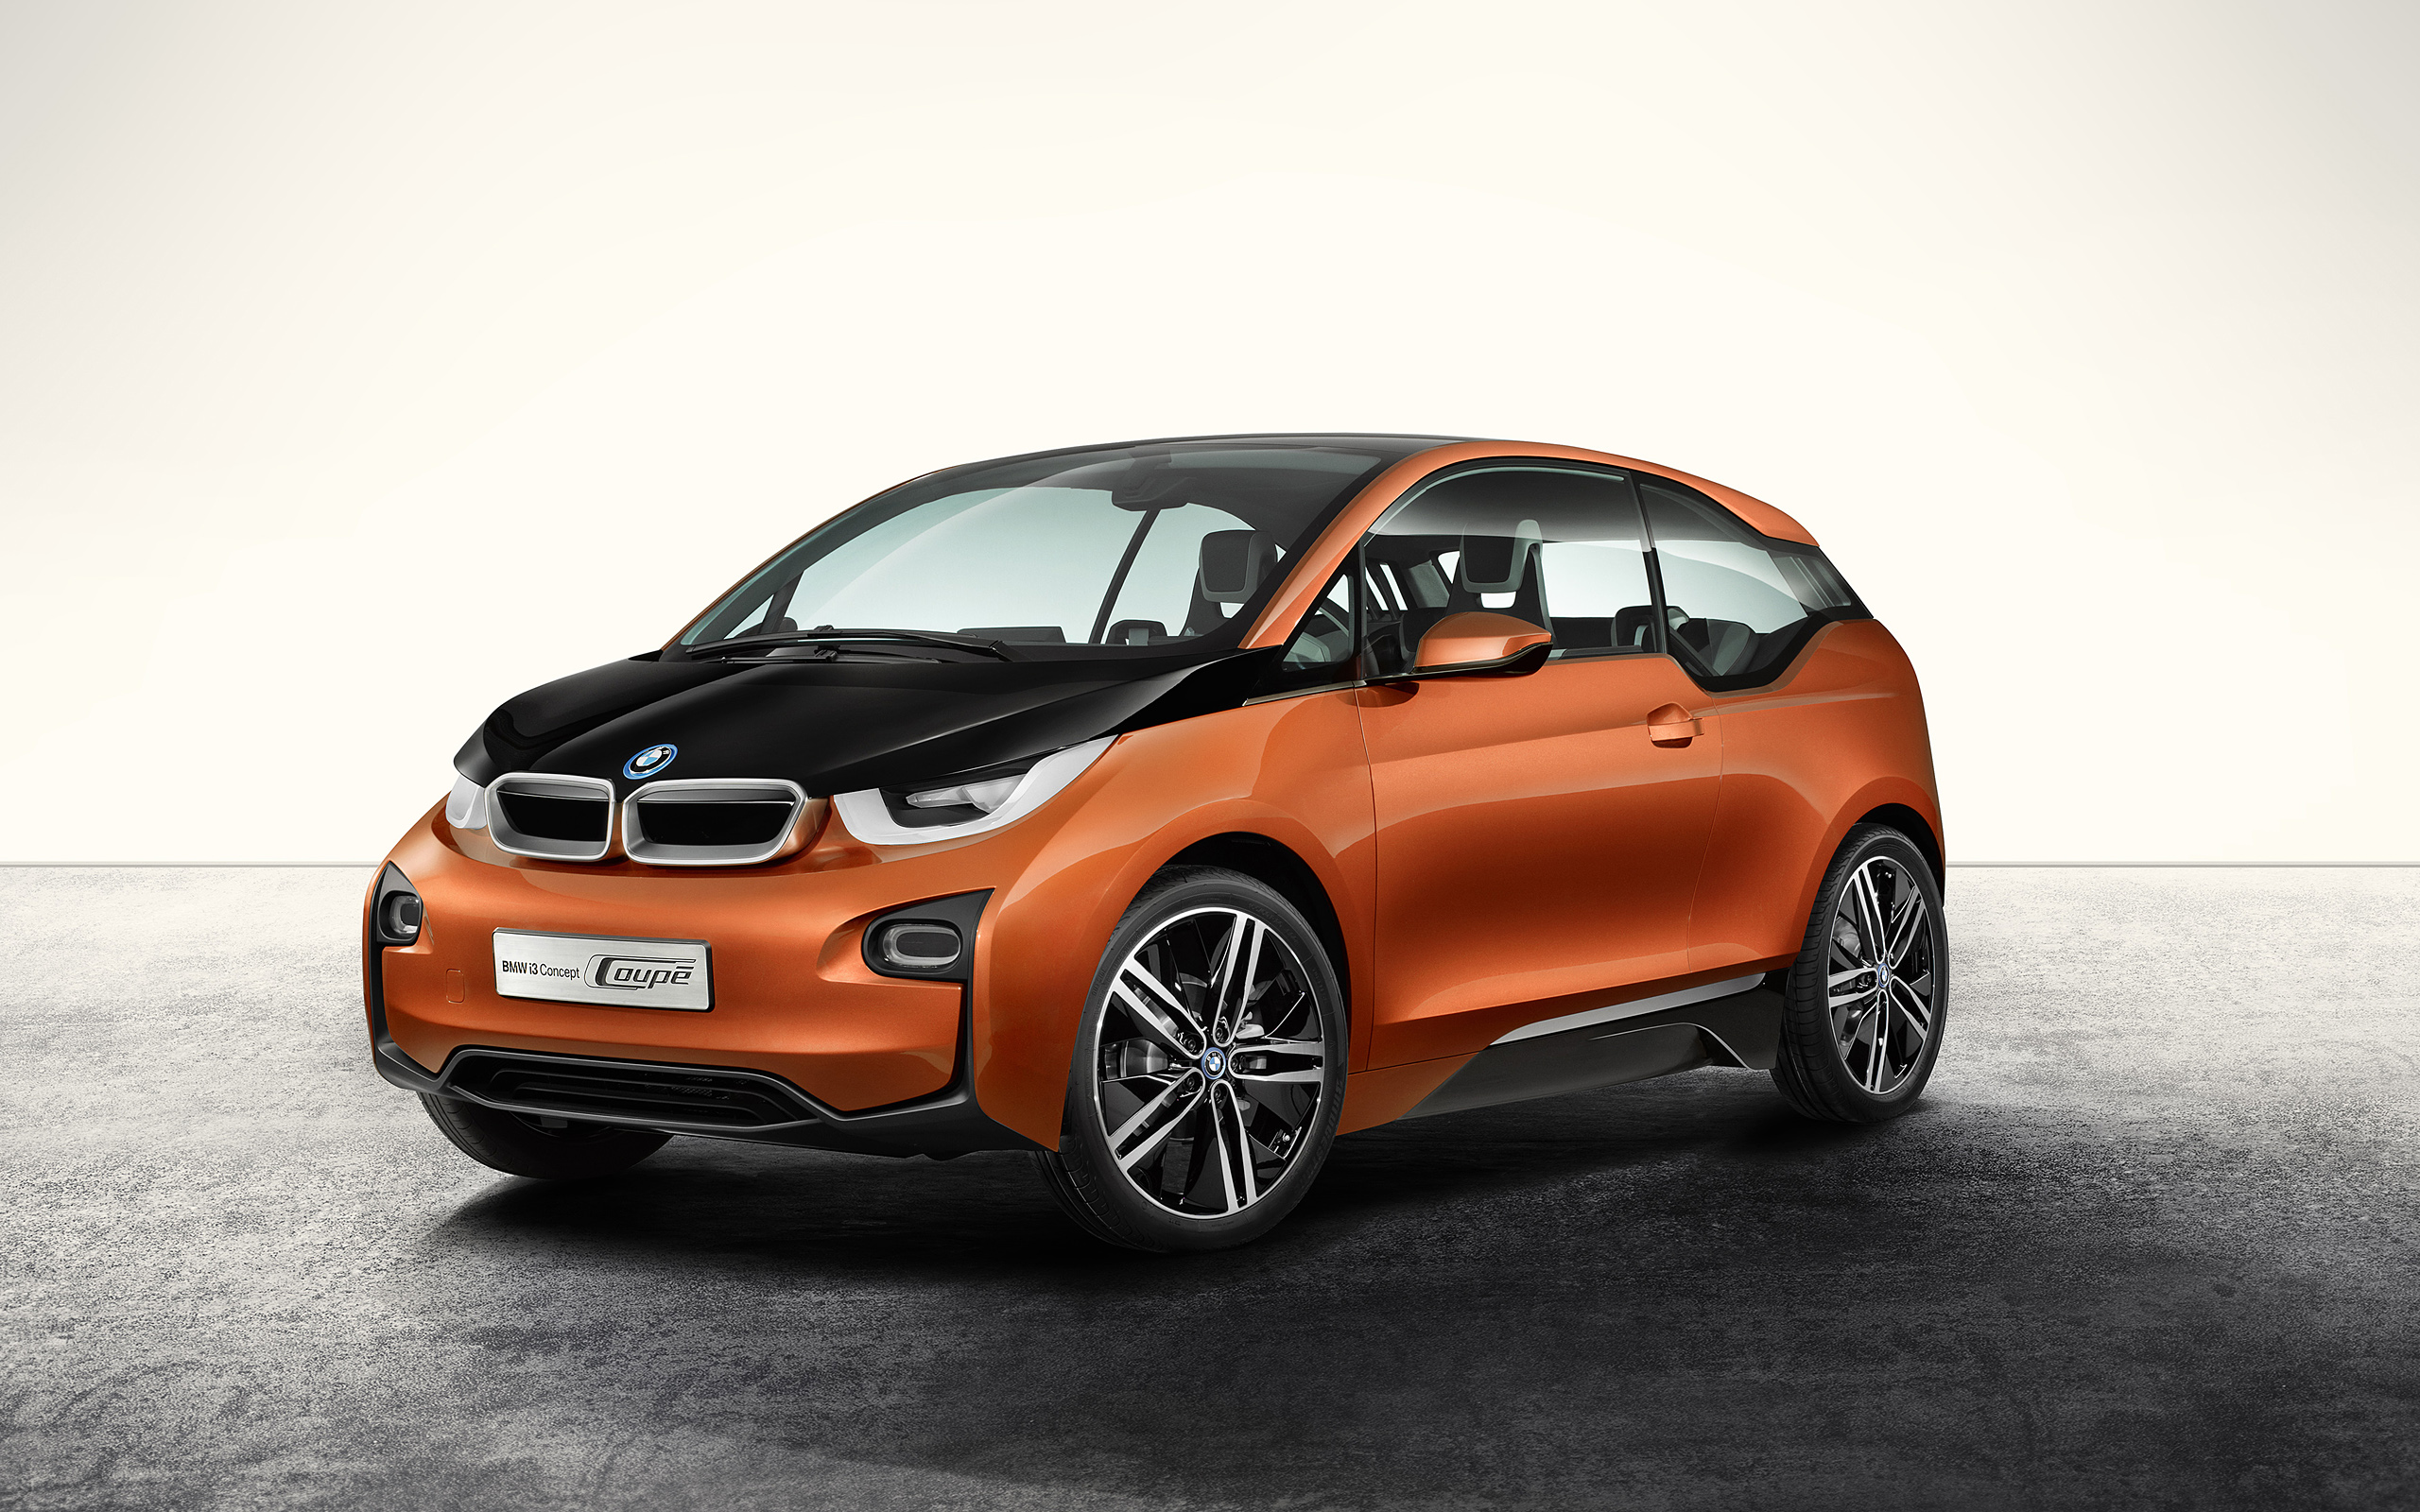  2012 BMW i3 Coupe Concept Wallpaper.